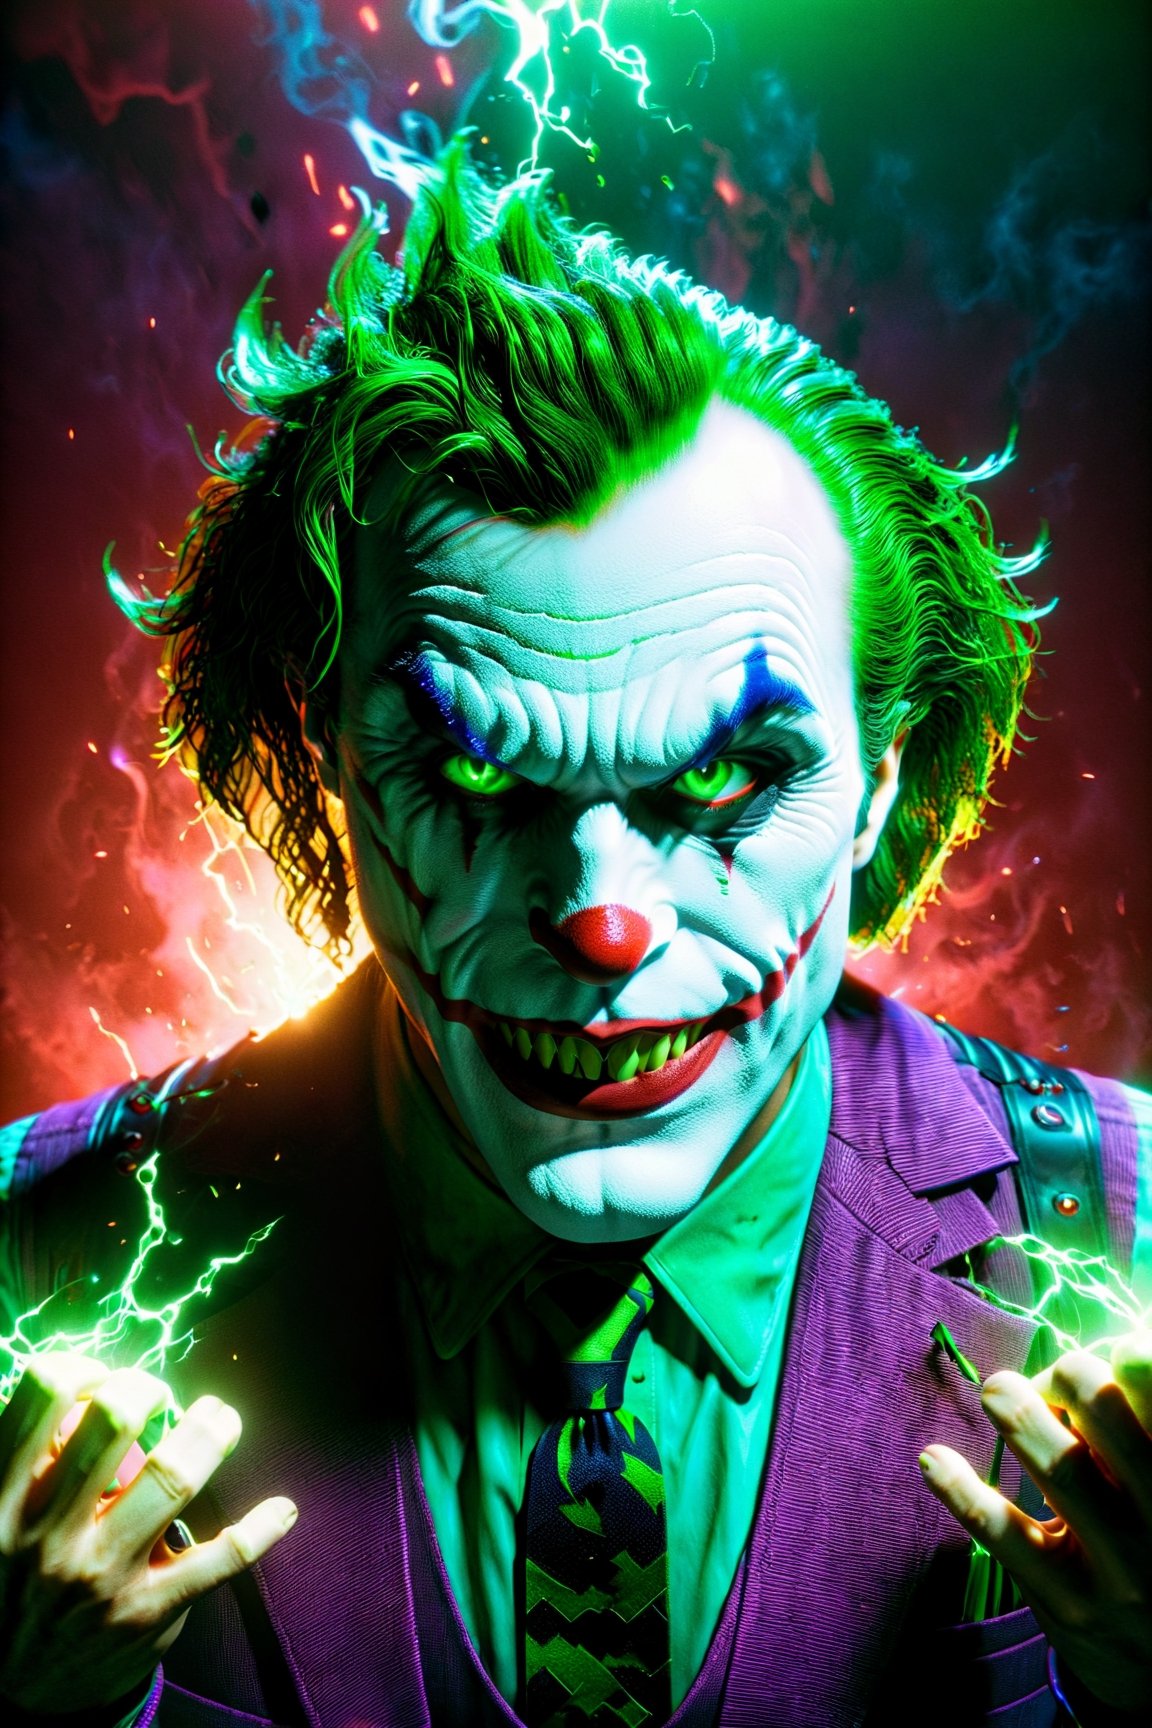 The Dark Joker with Green Evil Light eyes and lighting green thunder Dc , scary, Classic Academia, Flexography, ultra wide-angle, Game engine rendering, Grainy, Collage, analogous colors, Meatcore, infrared lighting, Super detailed, photorealistic, food photography, Cycles render, 4k

,Extremely Realistic